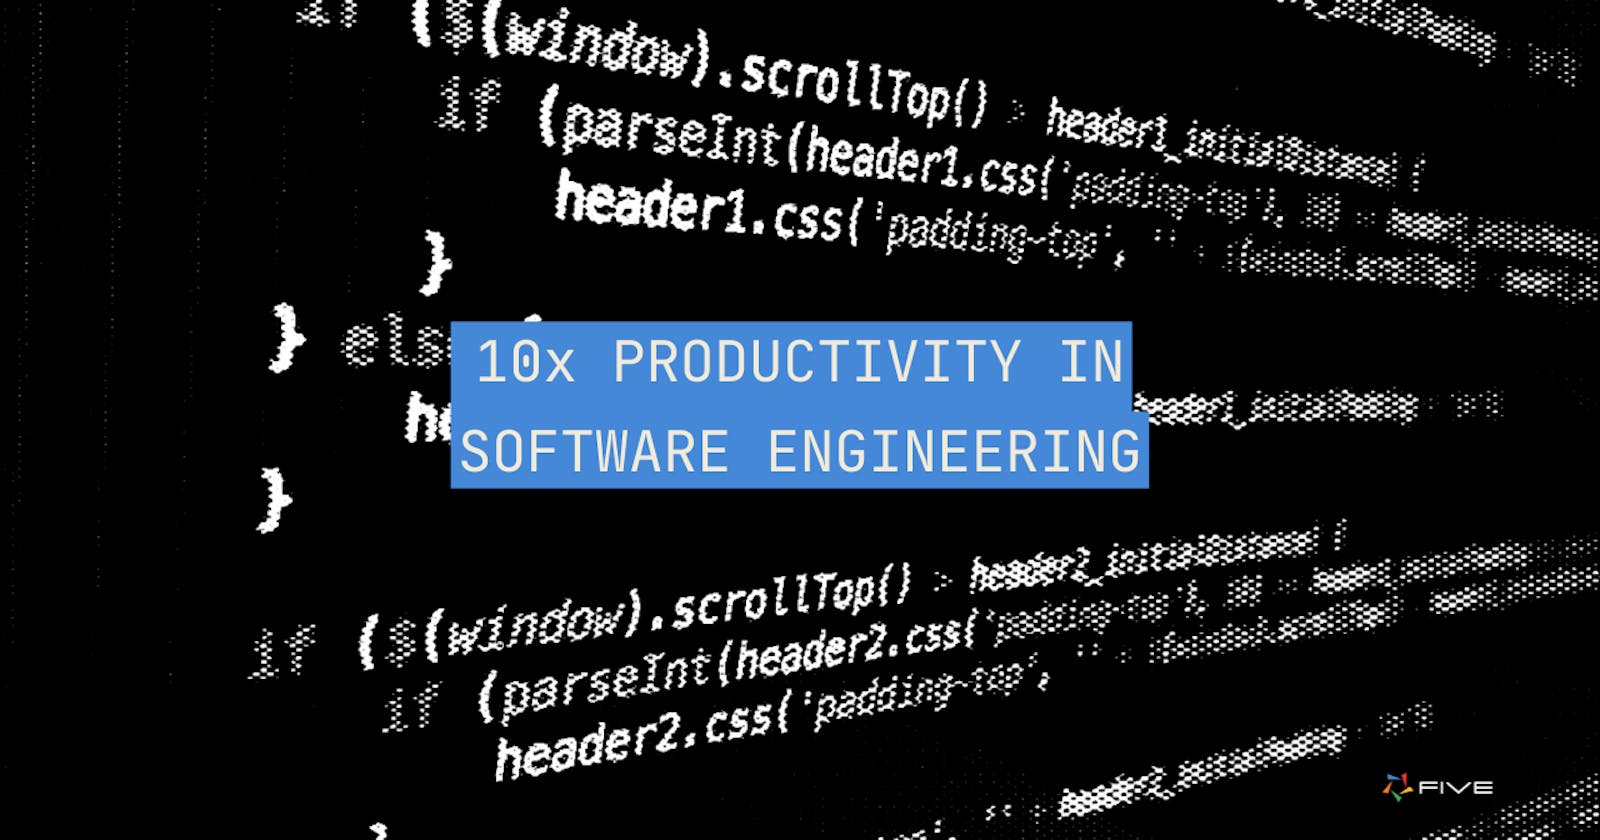 Low-Code: Achieving 10x Productivity Through Better Dev Tools